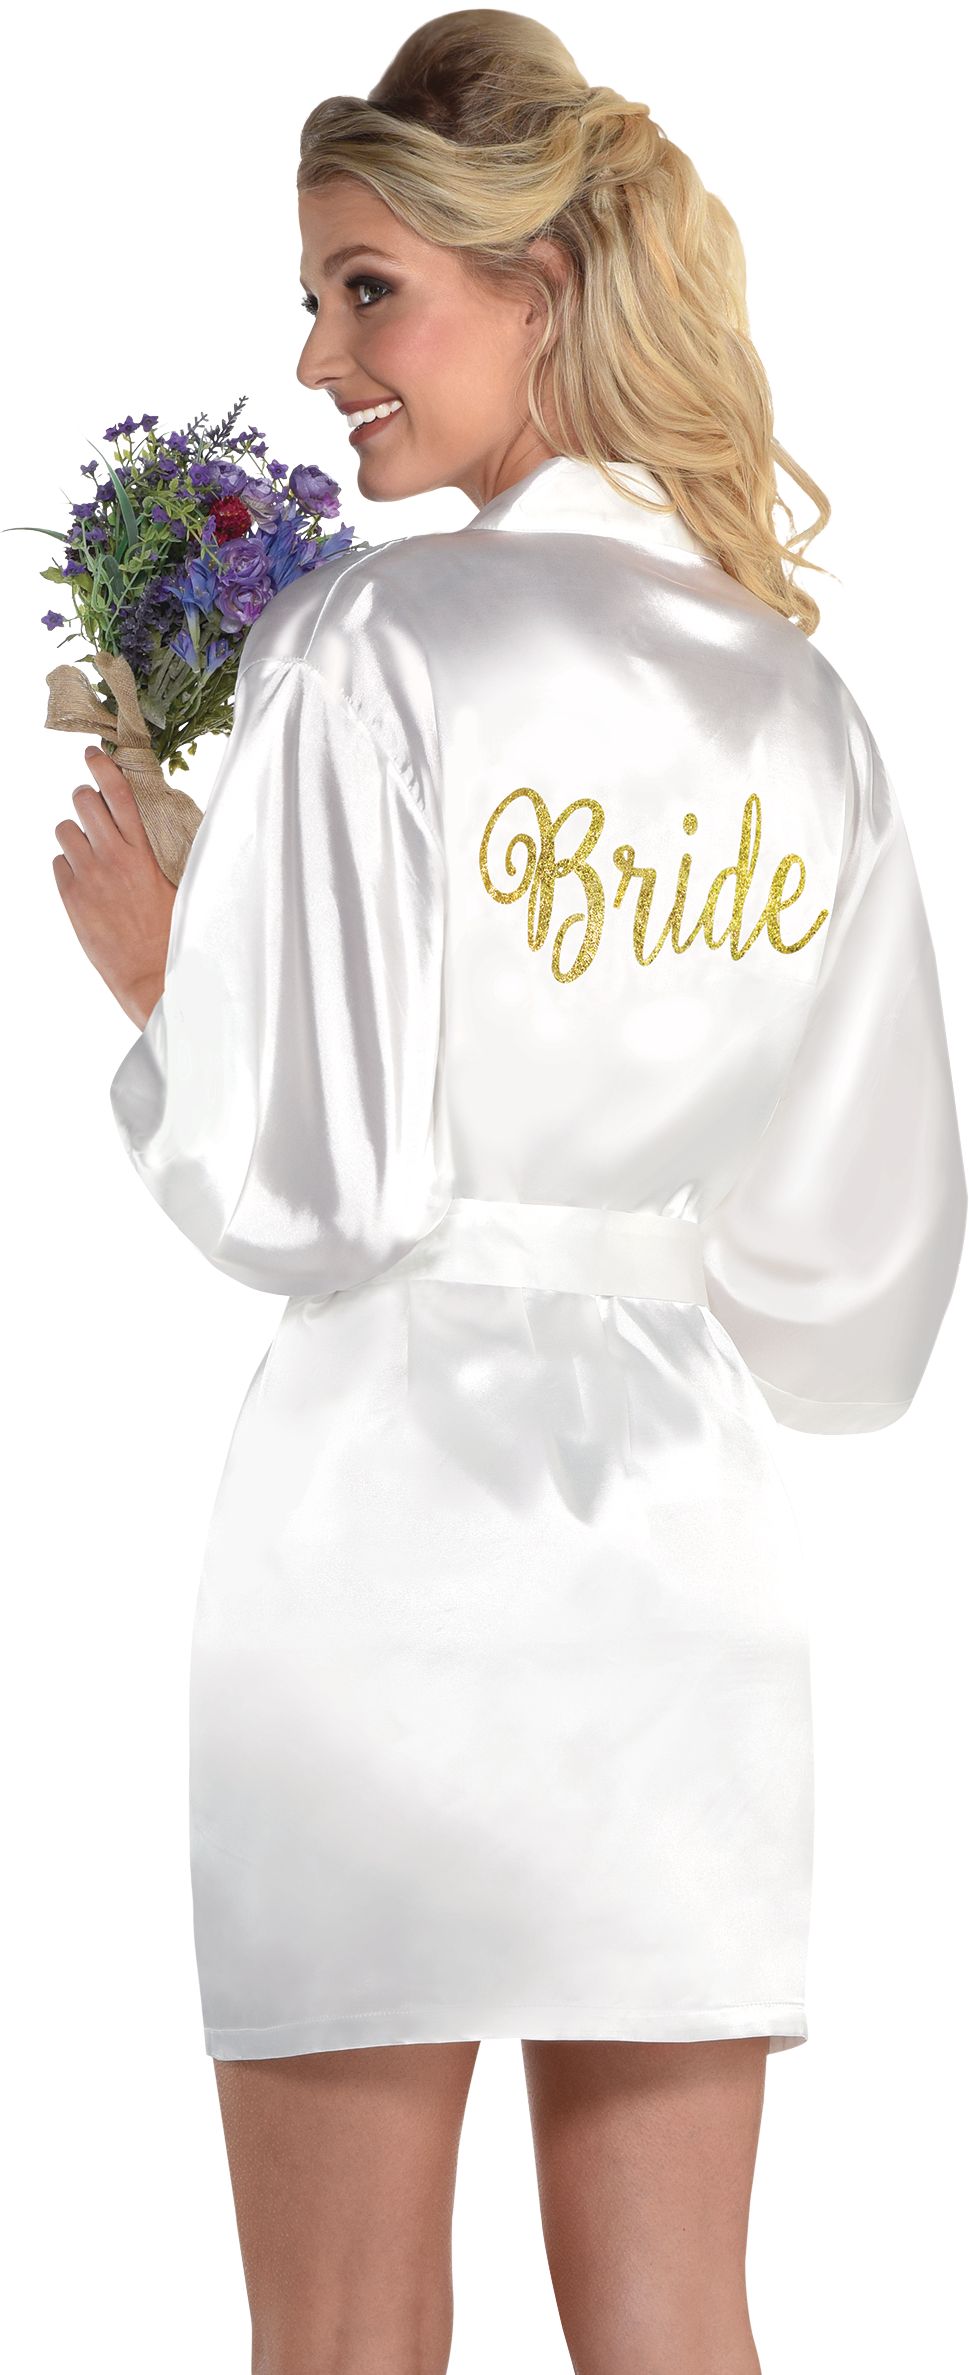 Adult Bride Satin Glitter Robe, Gold/White, One Size, Wearable Accessory  for Weddings/Bachelorette Party